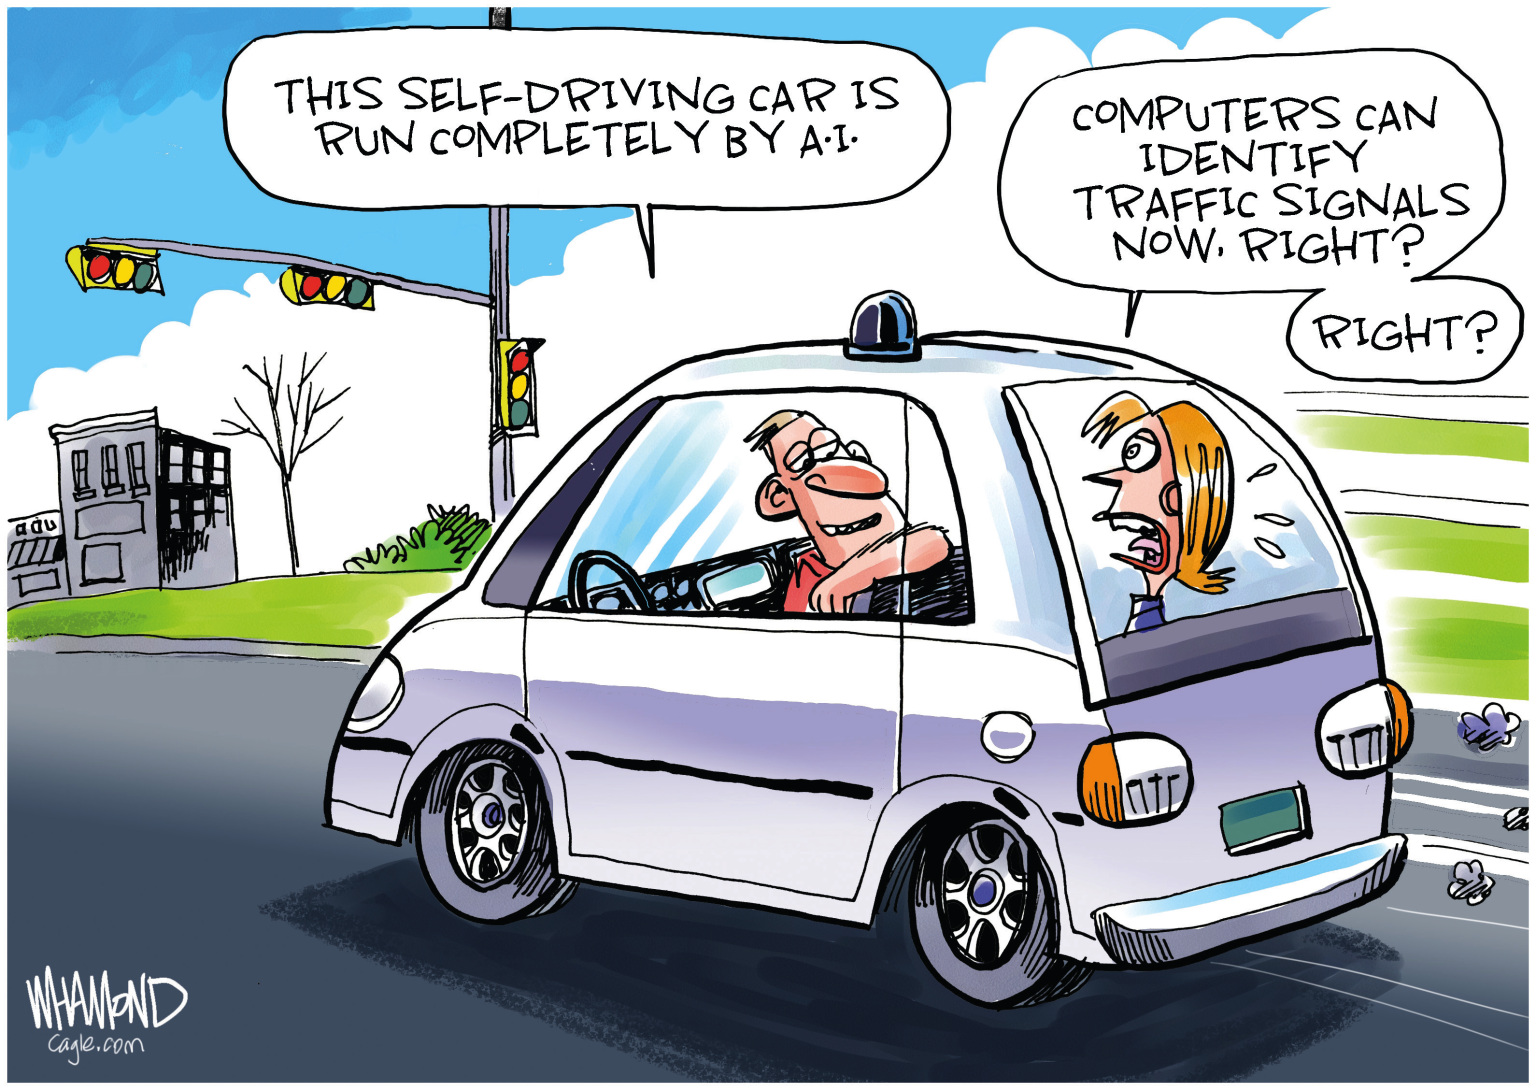 Self Driving Cars - By Dave Whamond